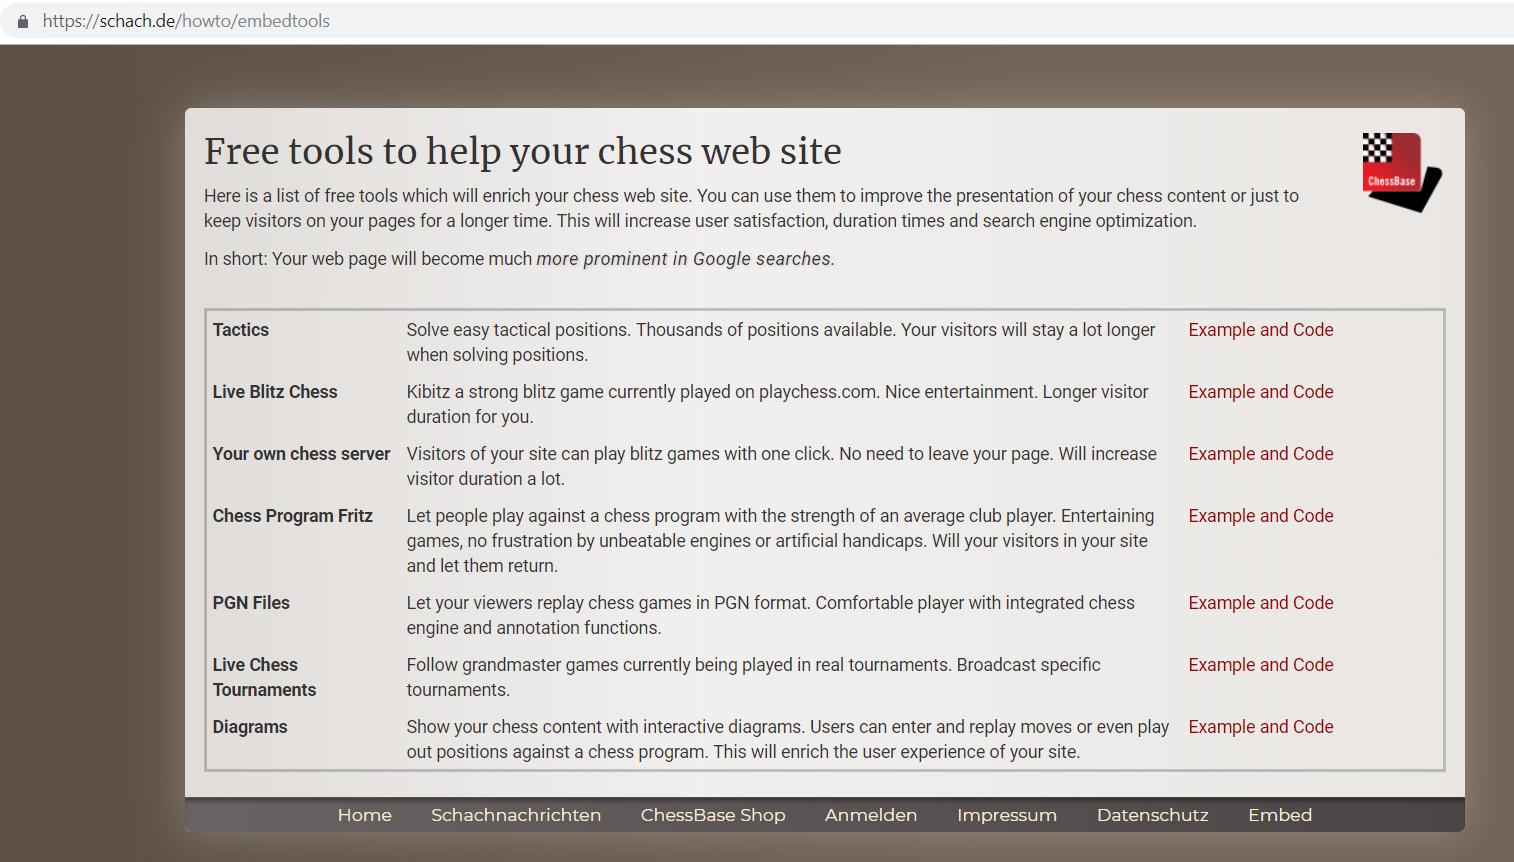 Must-have: ChessBase tools for your website